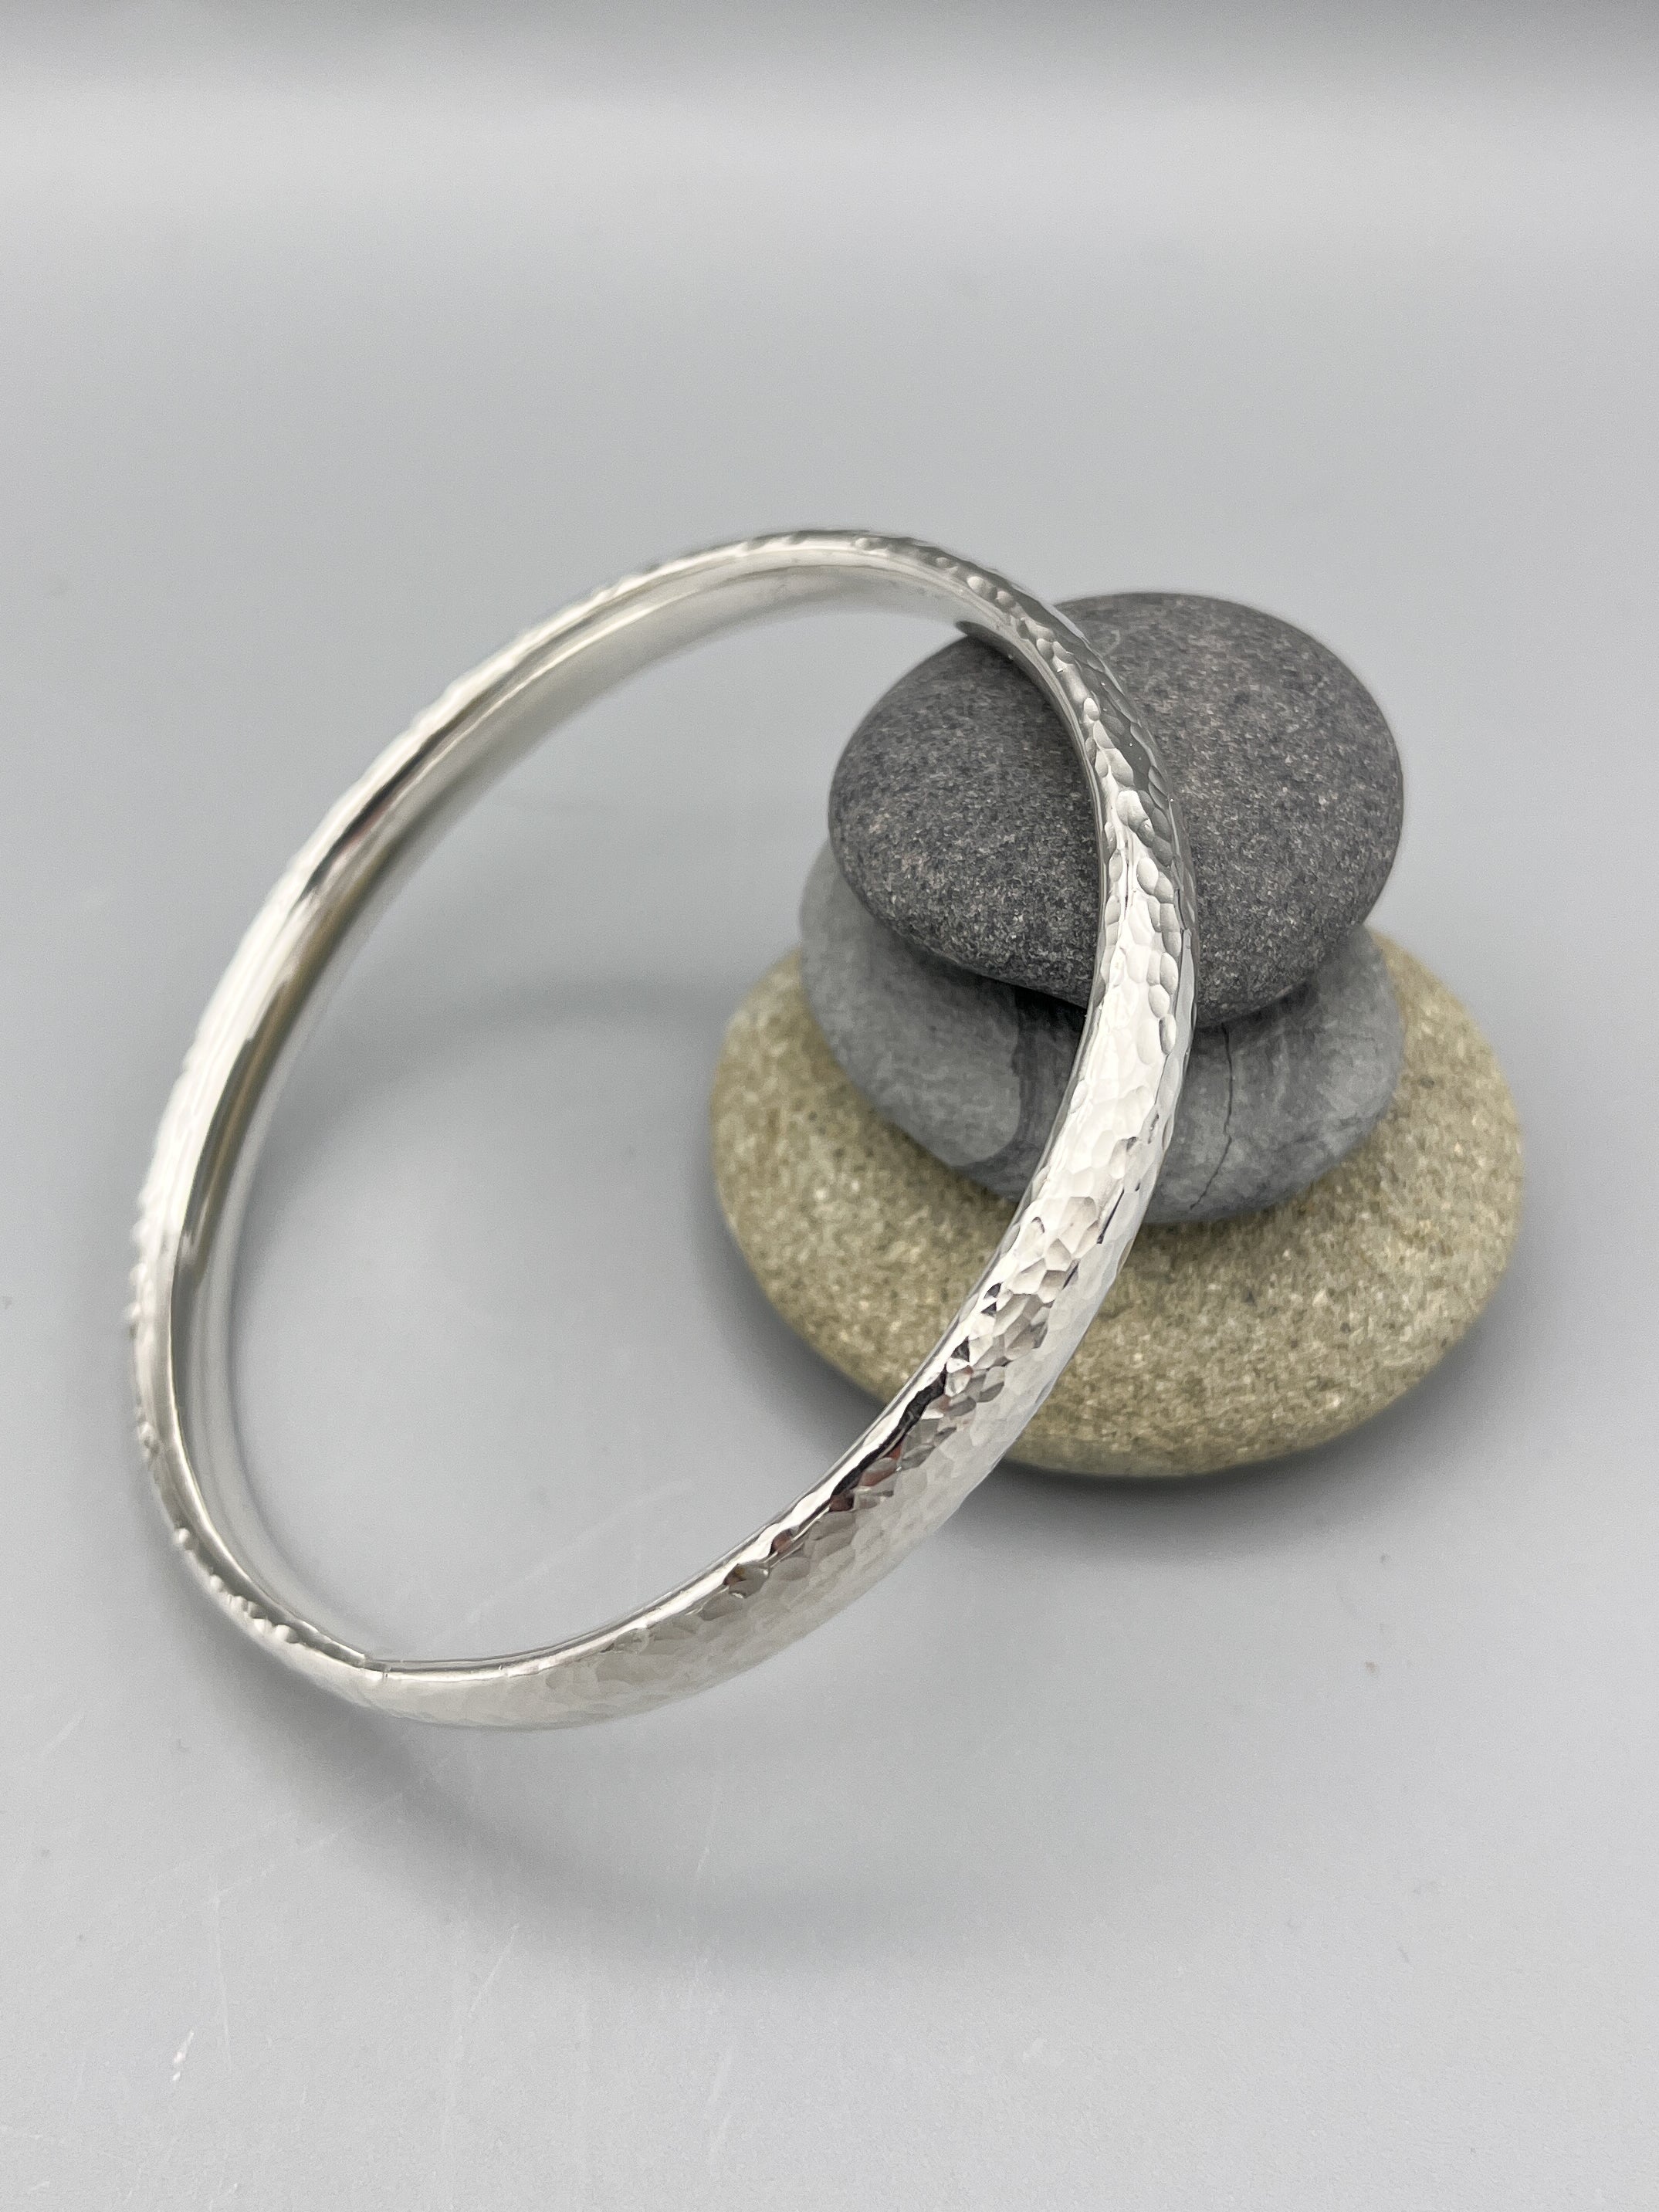 Sterling Silver Bangle, oval design with a hammered finish